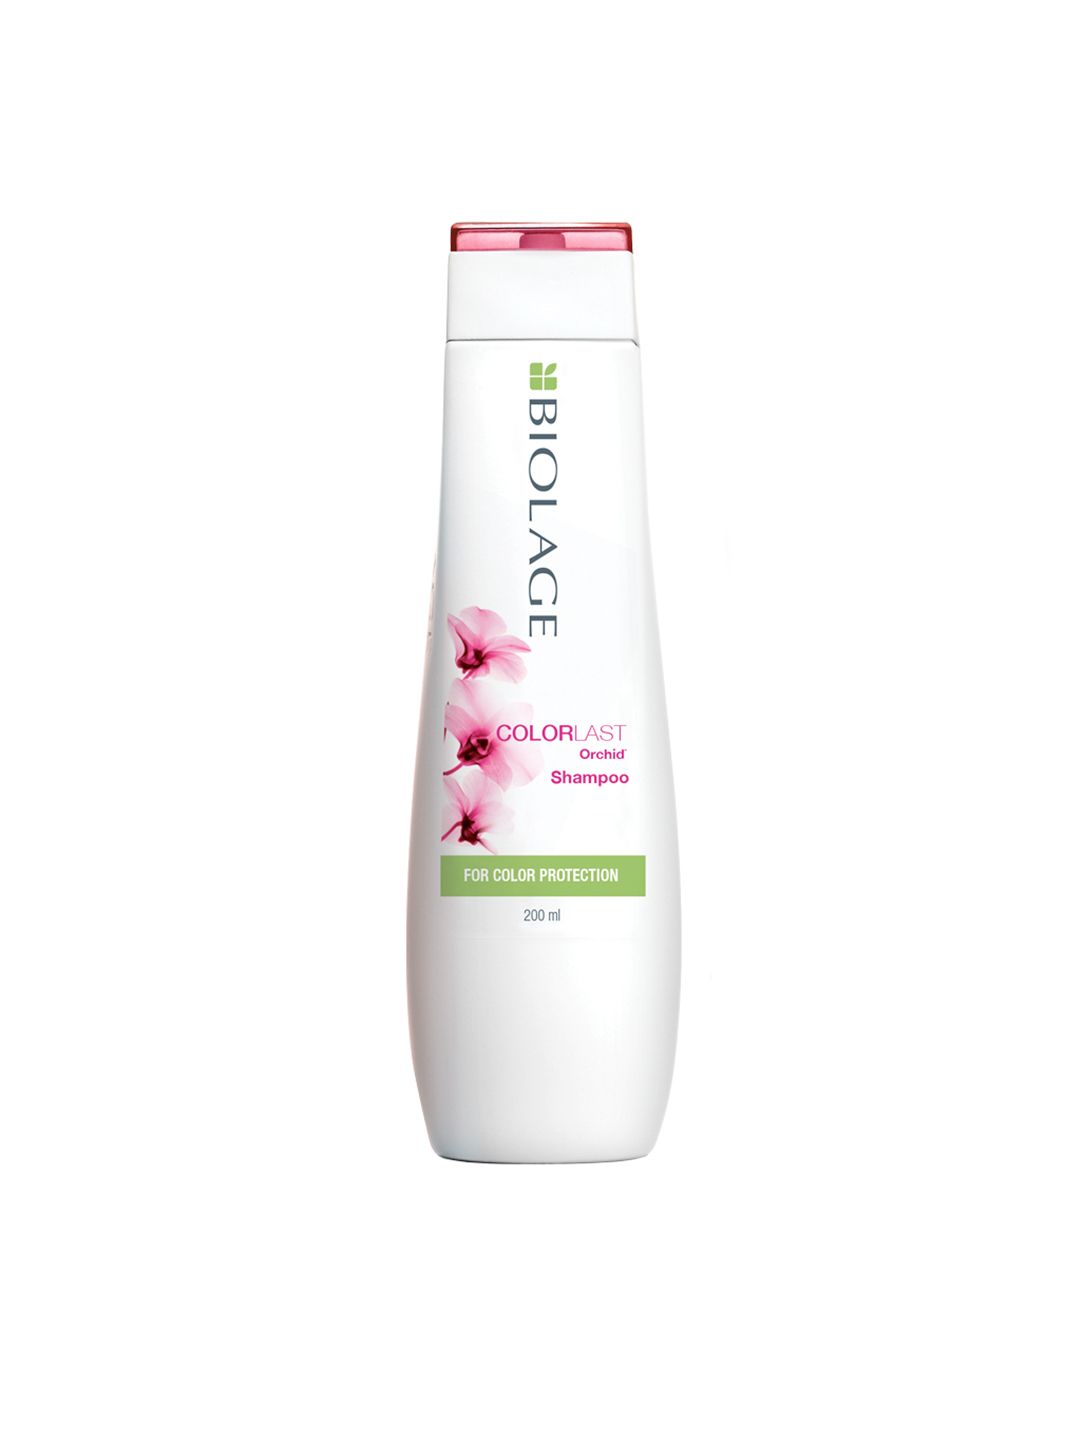 Biolage Color Last Orchid Shampoo for Color Protection - 200 ml Price in India